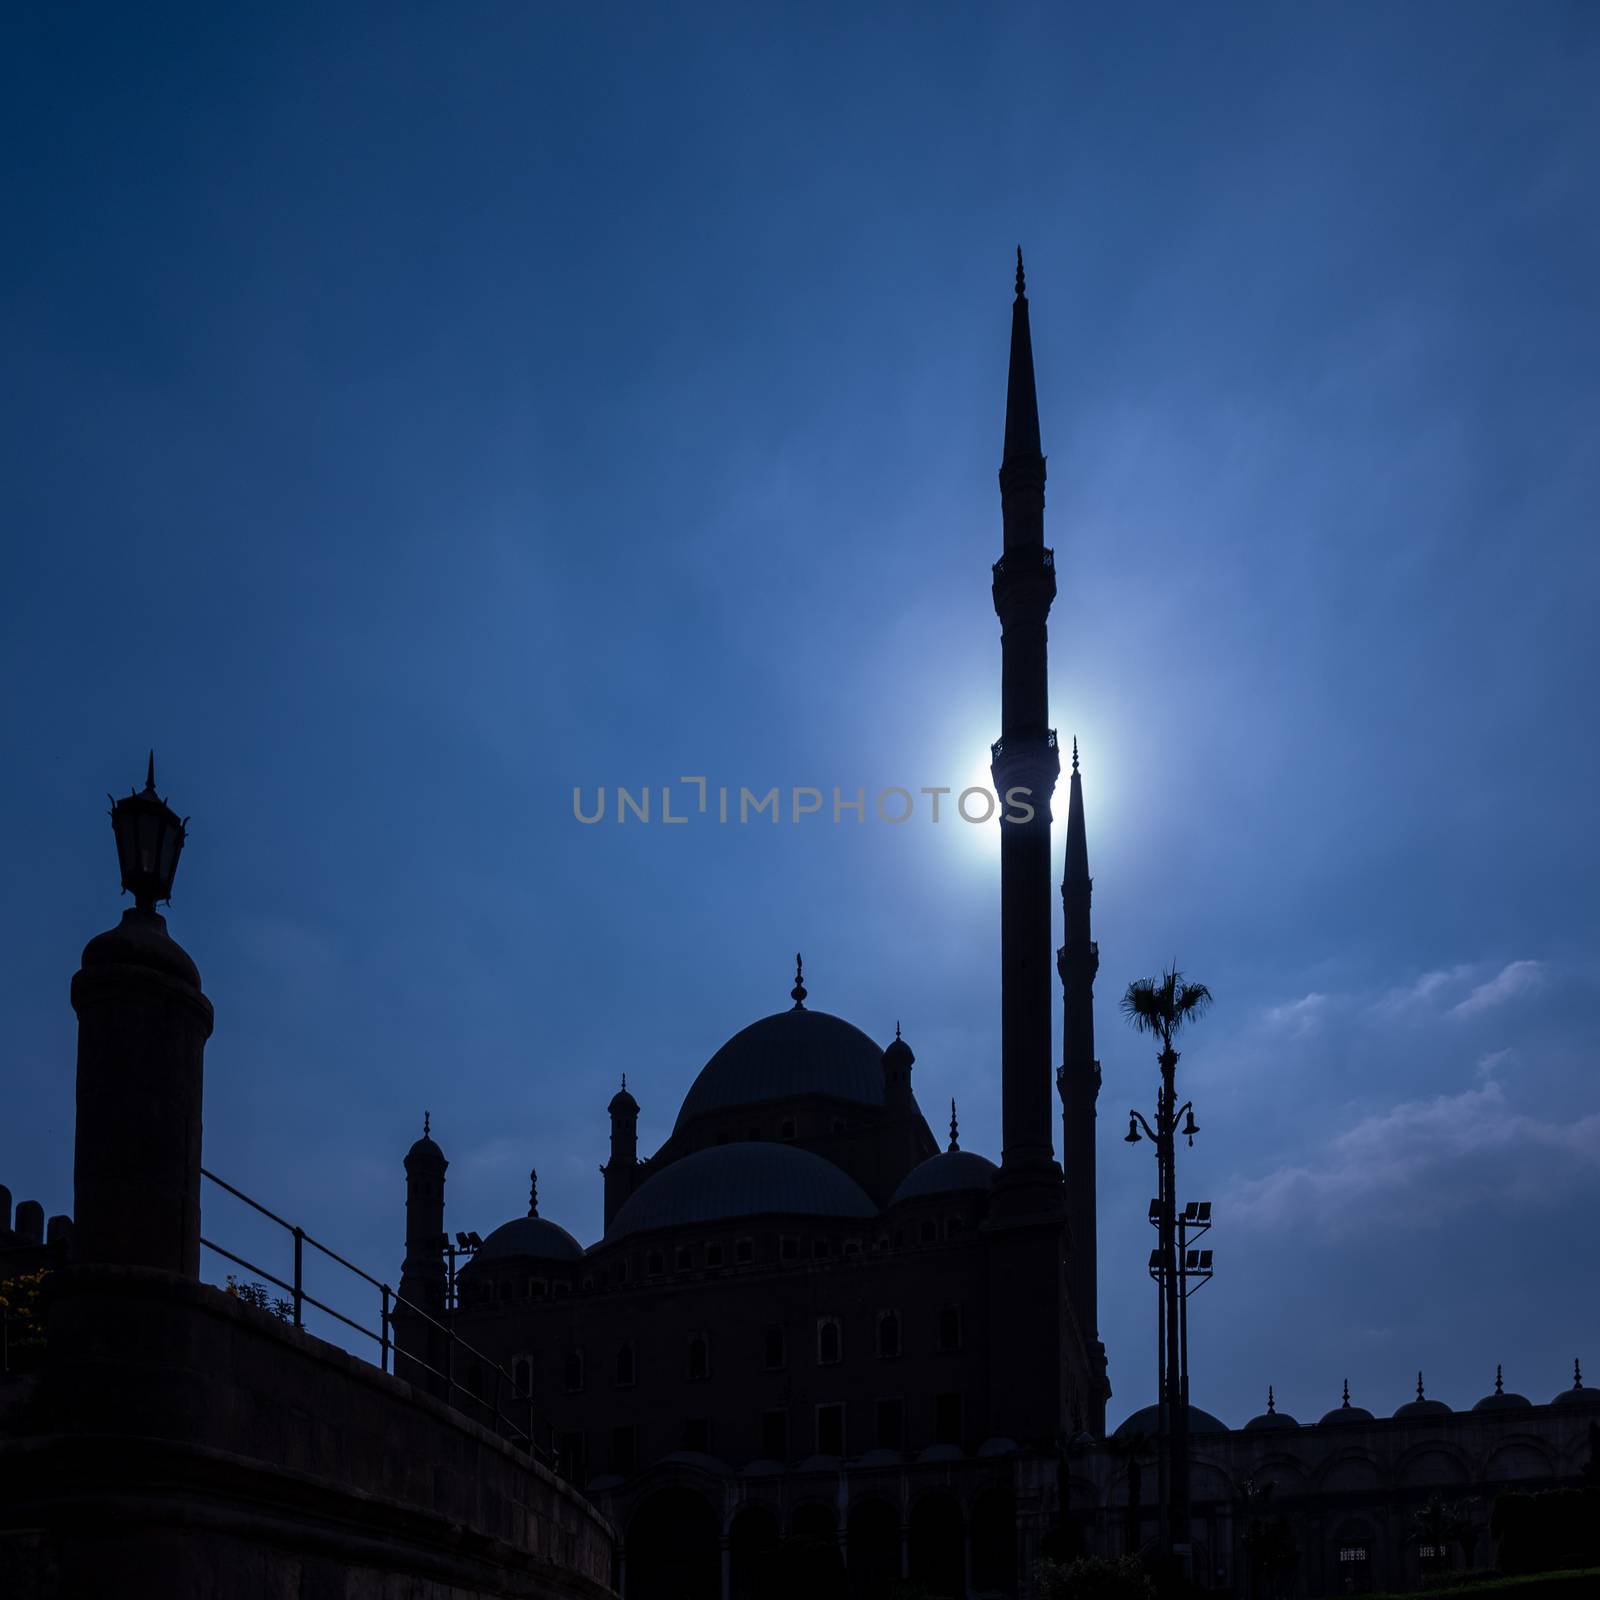 An image of the Mosque of Muhammad Ali in Cairo Egypt at night